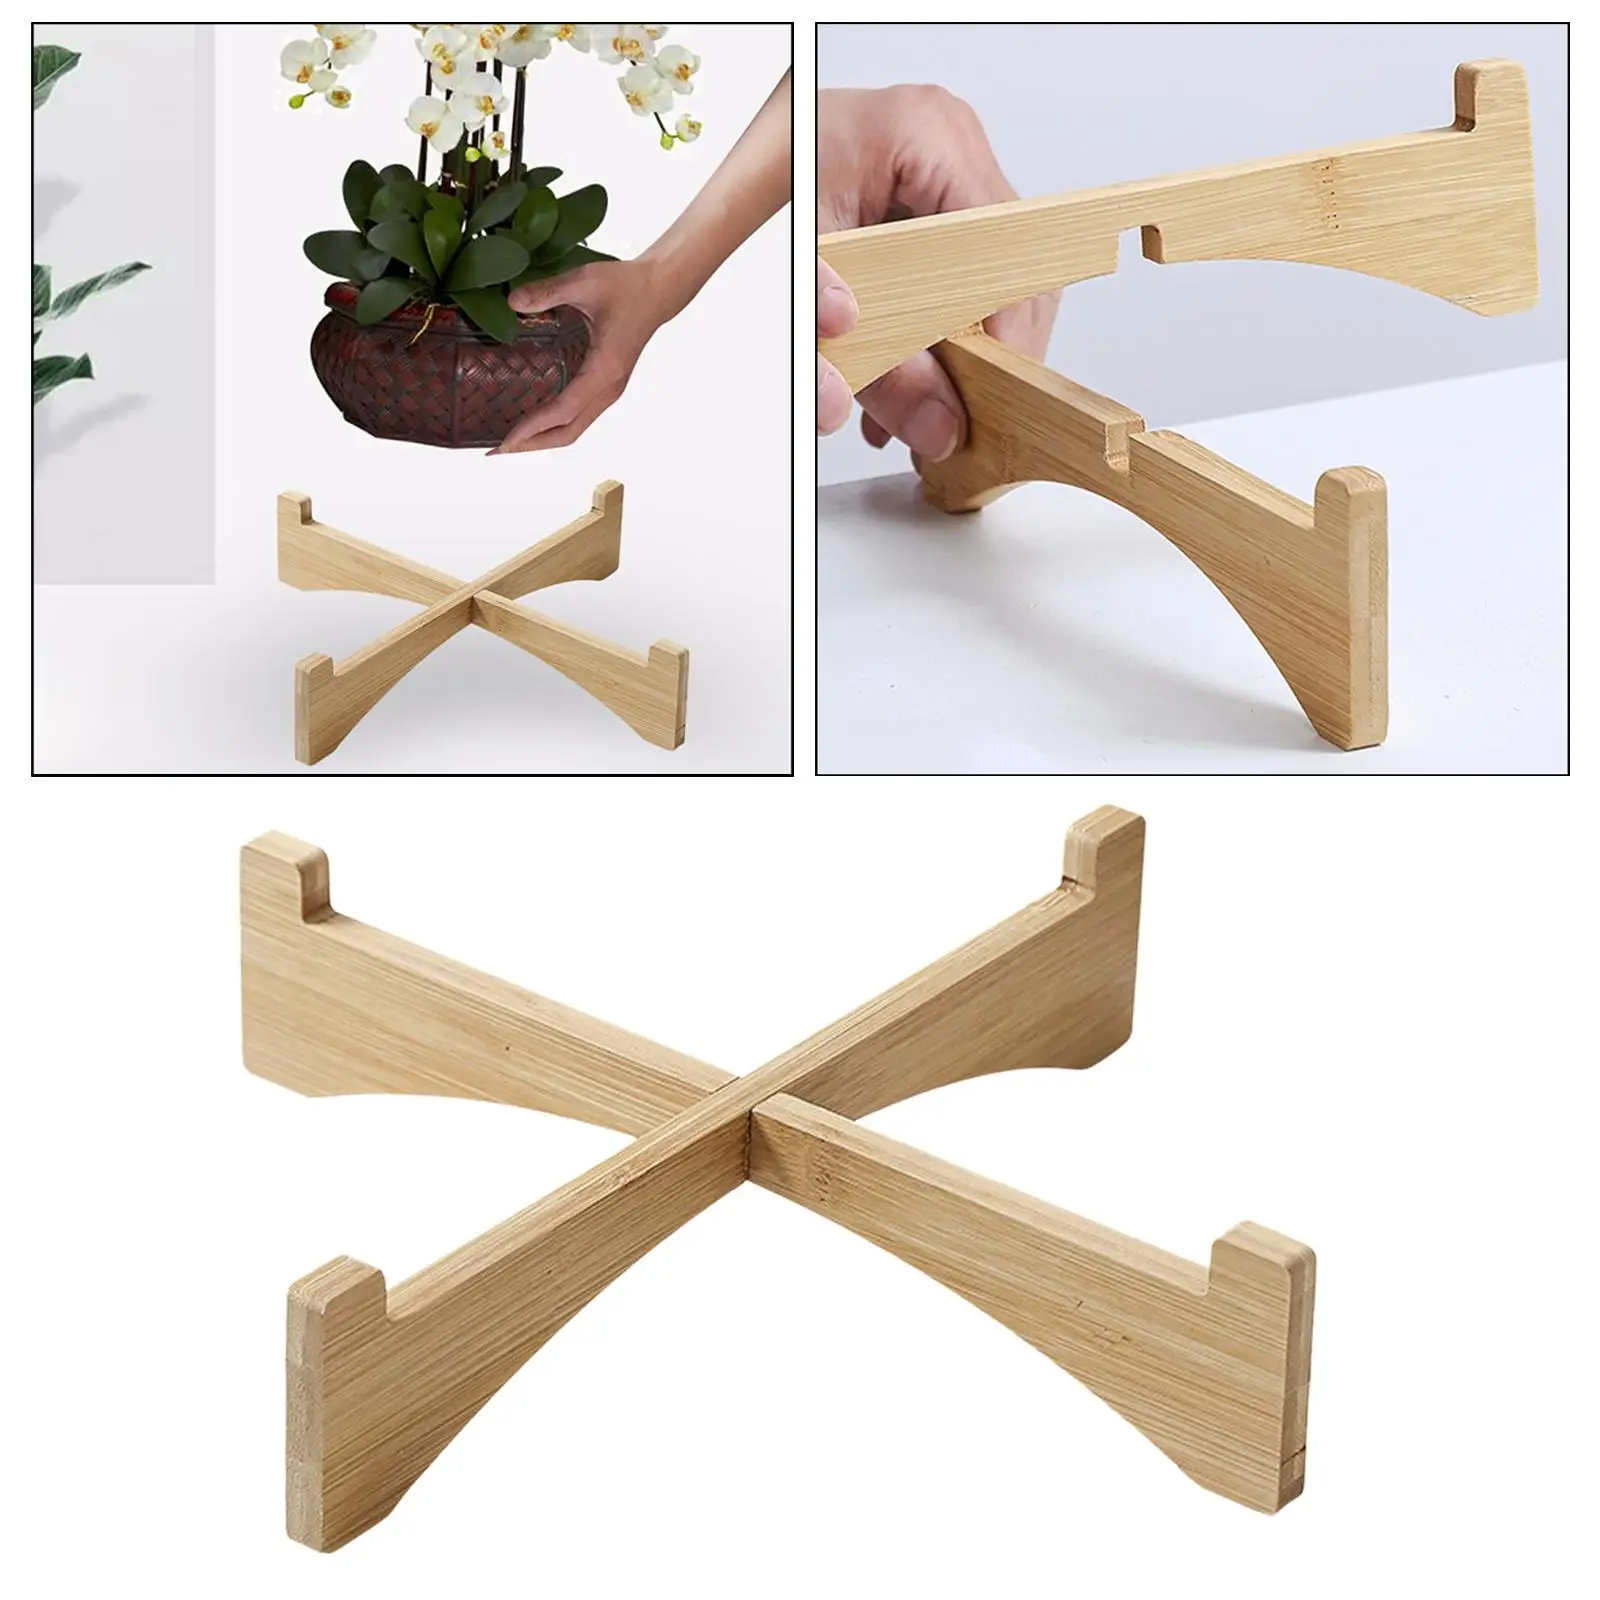 Minimalist Pot Holder Stand Corner Plant Stand Wooden Stool Flower Display Stand Wooden Stool Riser for Dining Room Office Decor